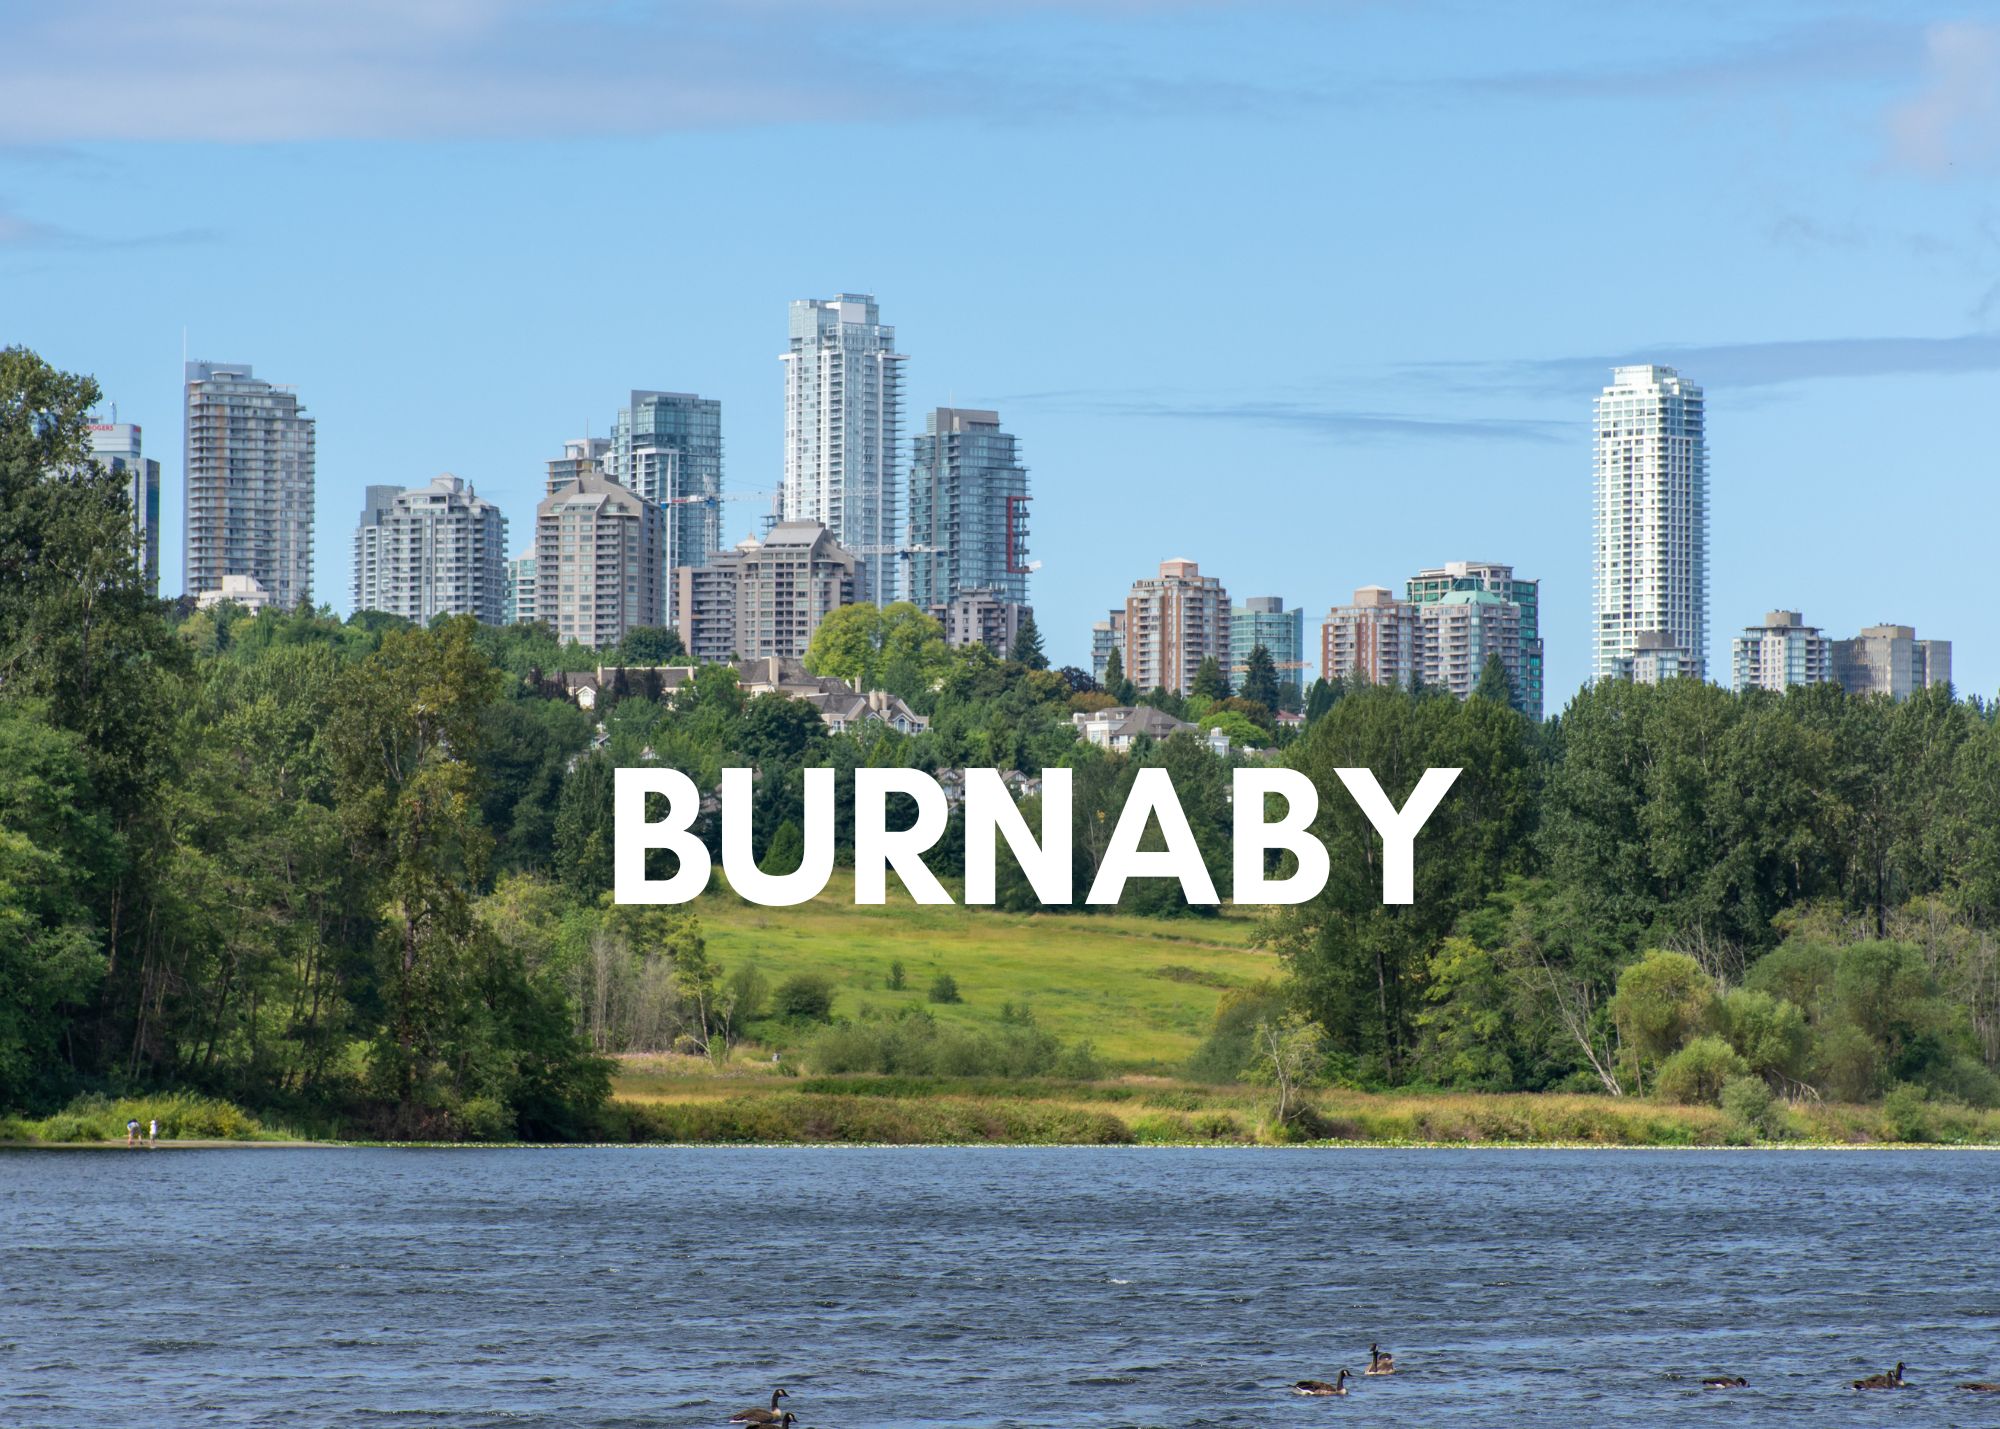 Thinking about moving to Metrotown, Burnaby?